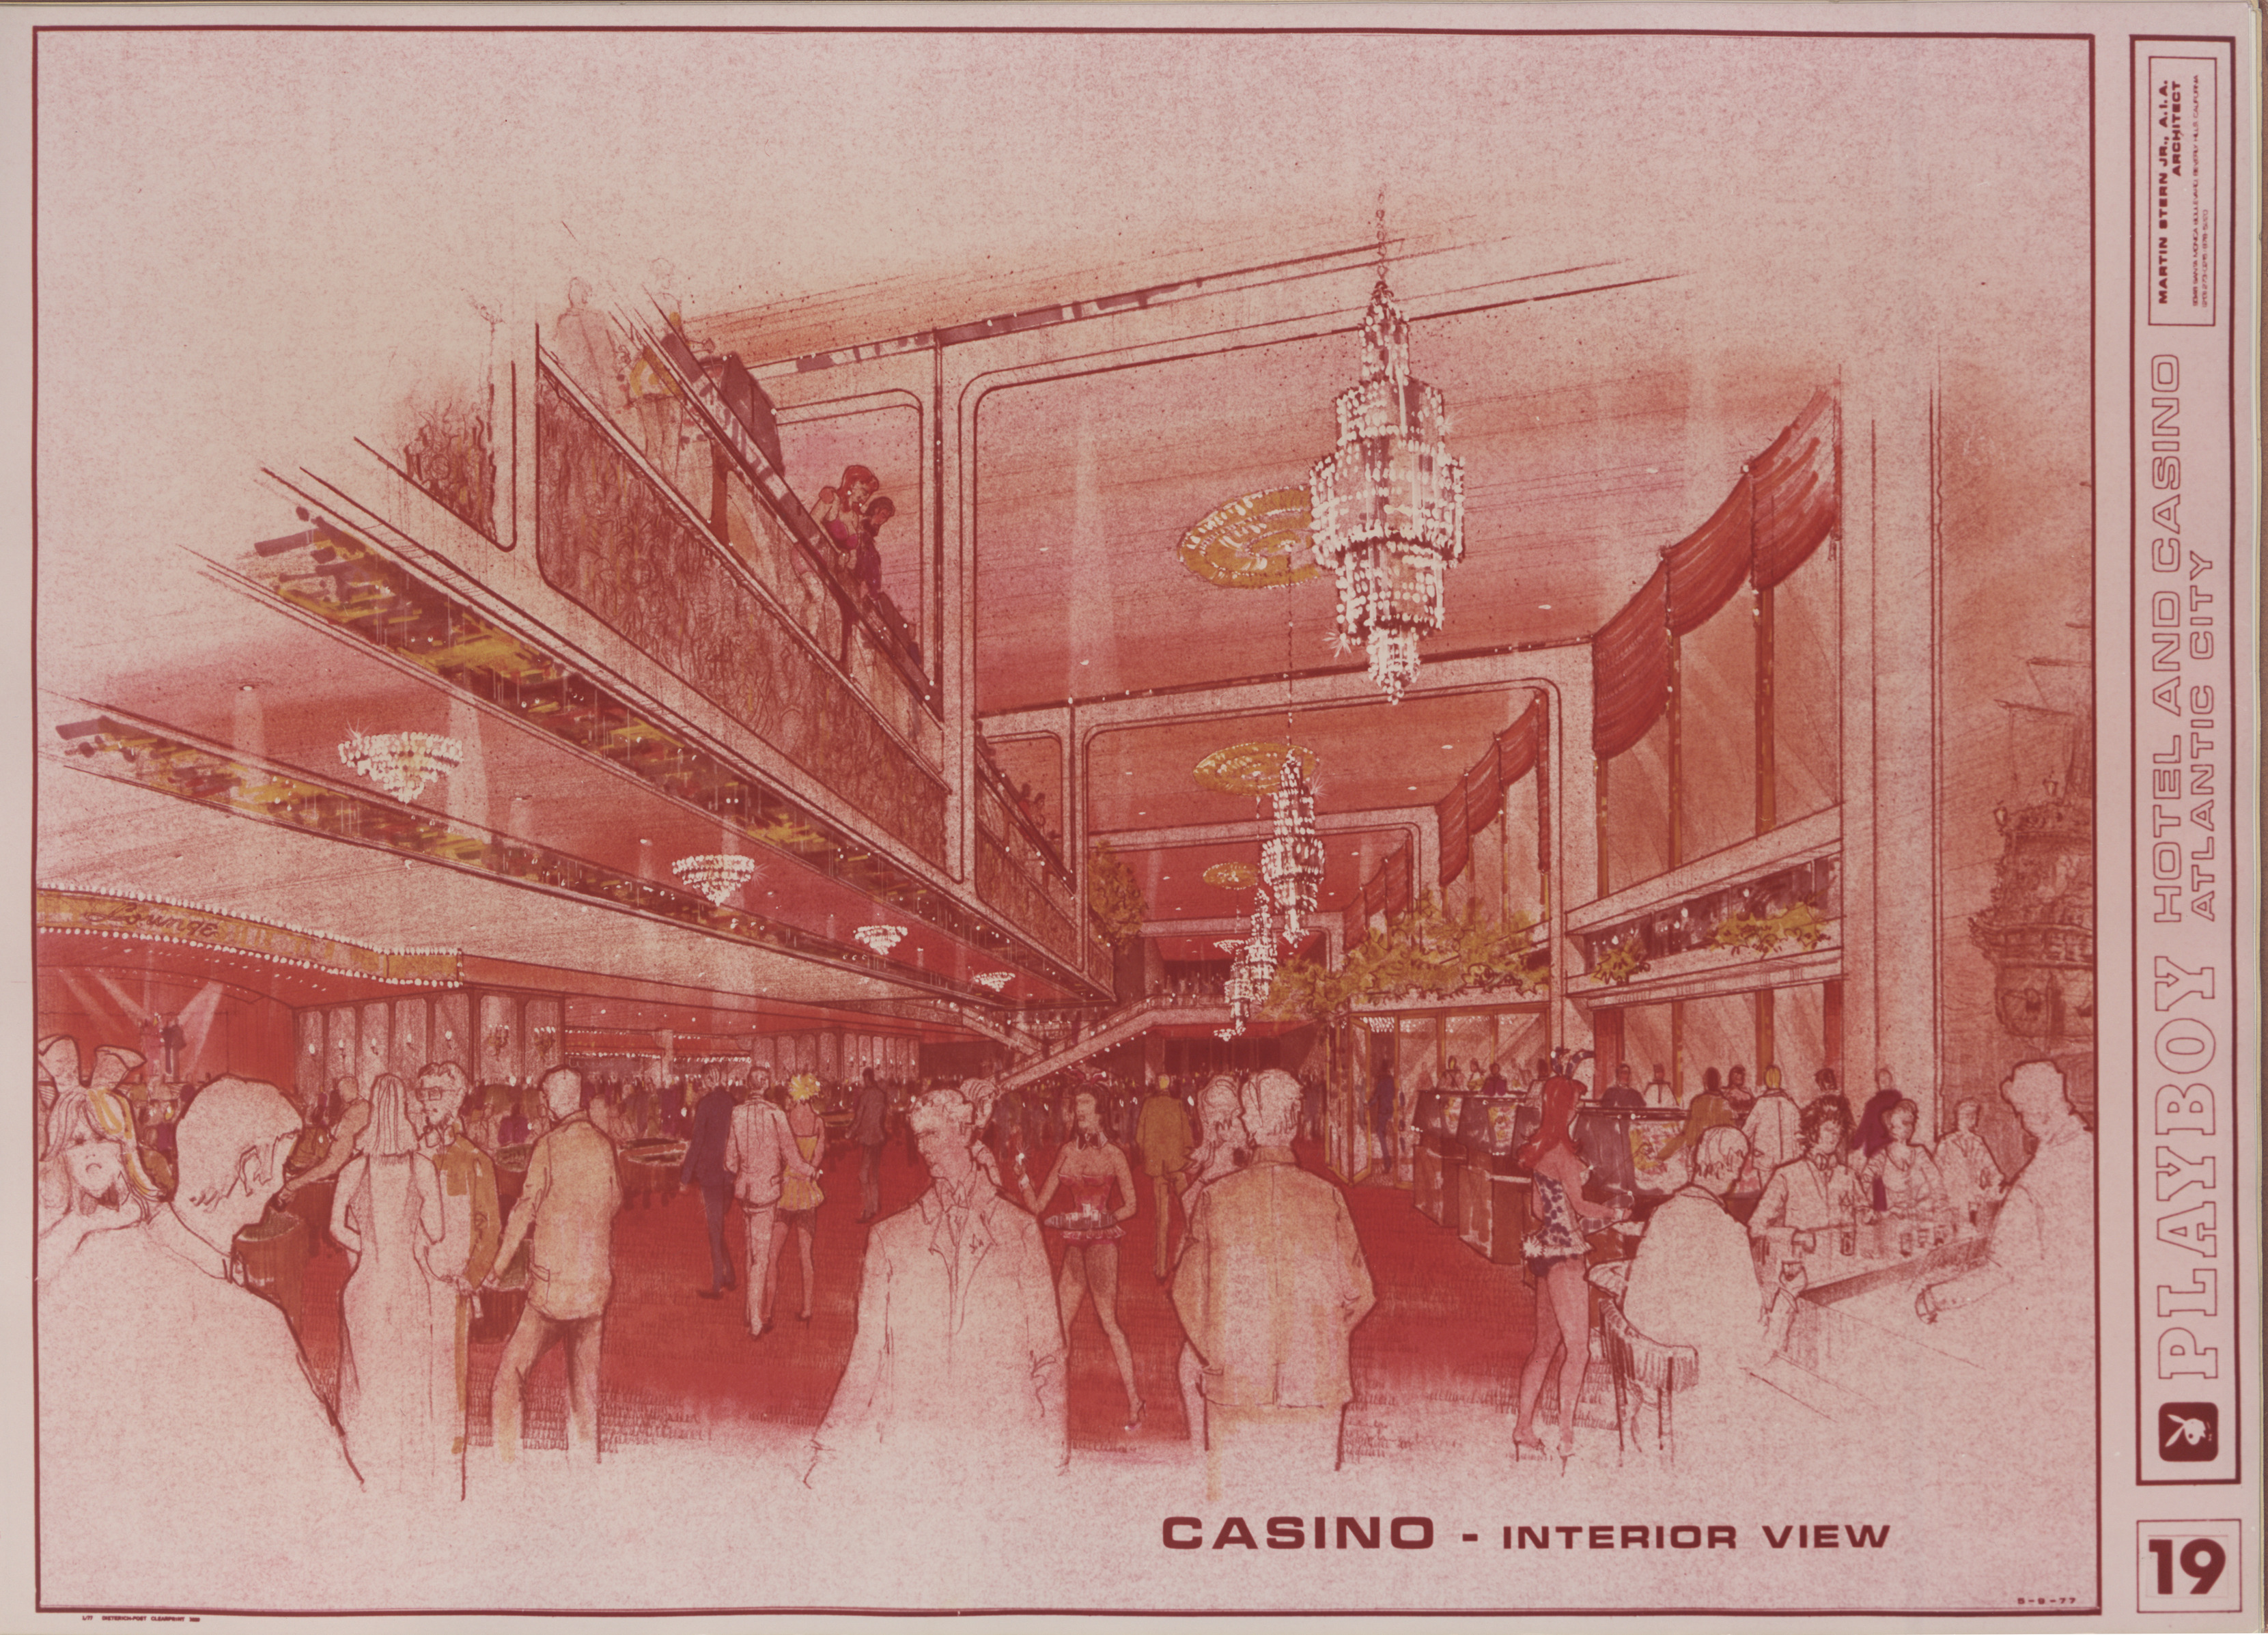 Playboy Hotel and Casino Proposal, image 19